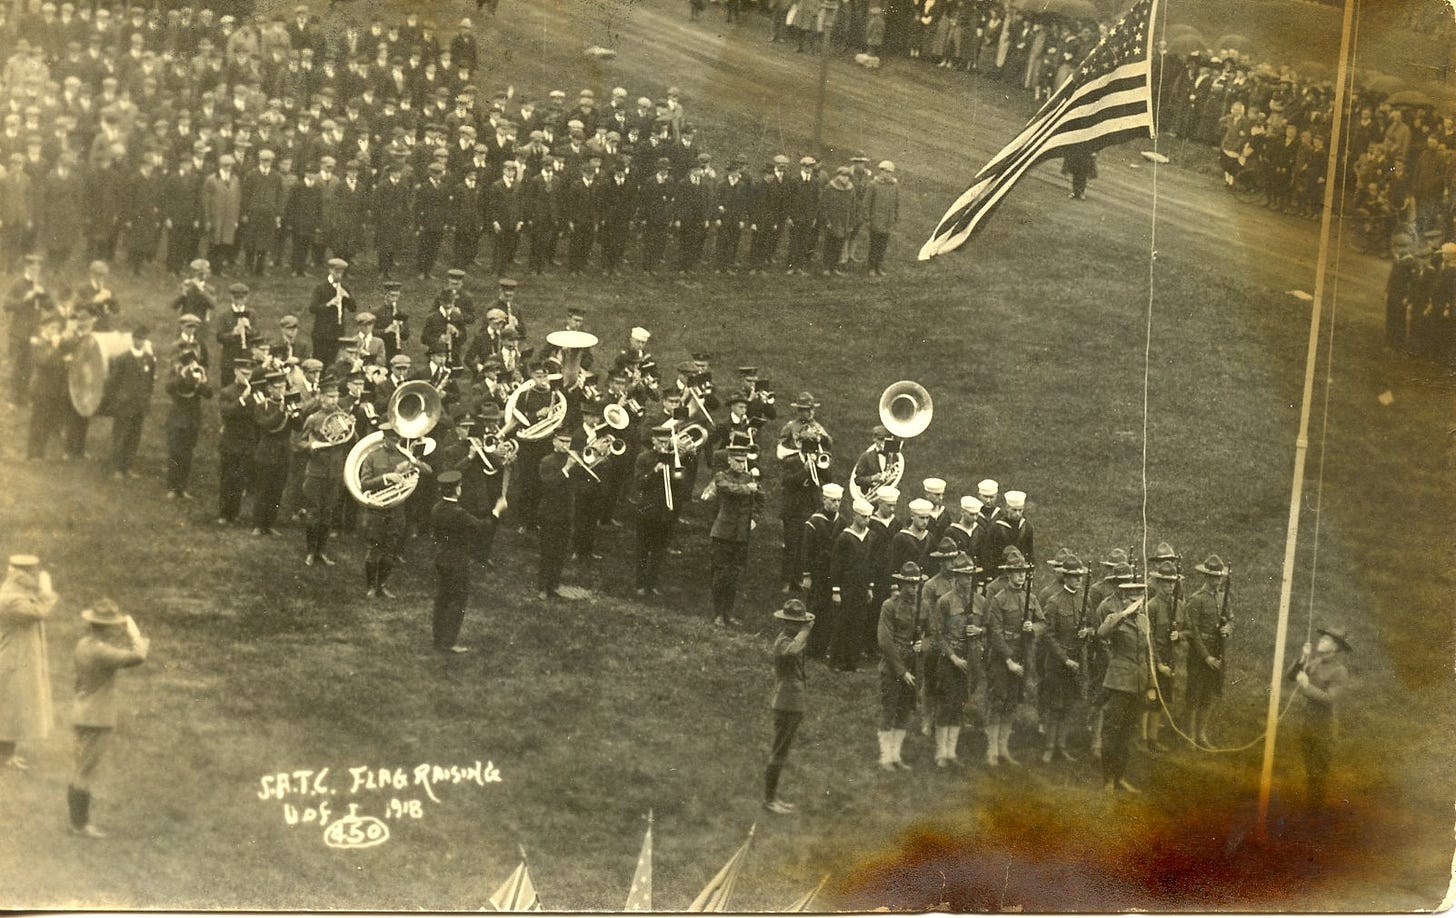 Students taking their oath to enter the Student Army Activity Corps on October 1, 1918.